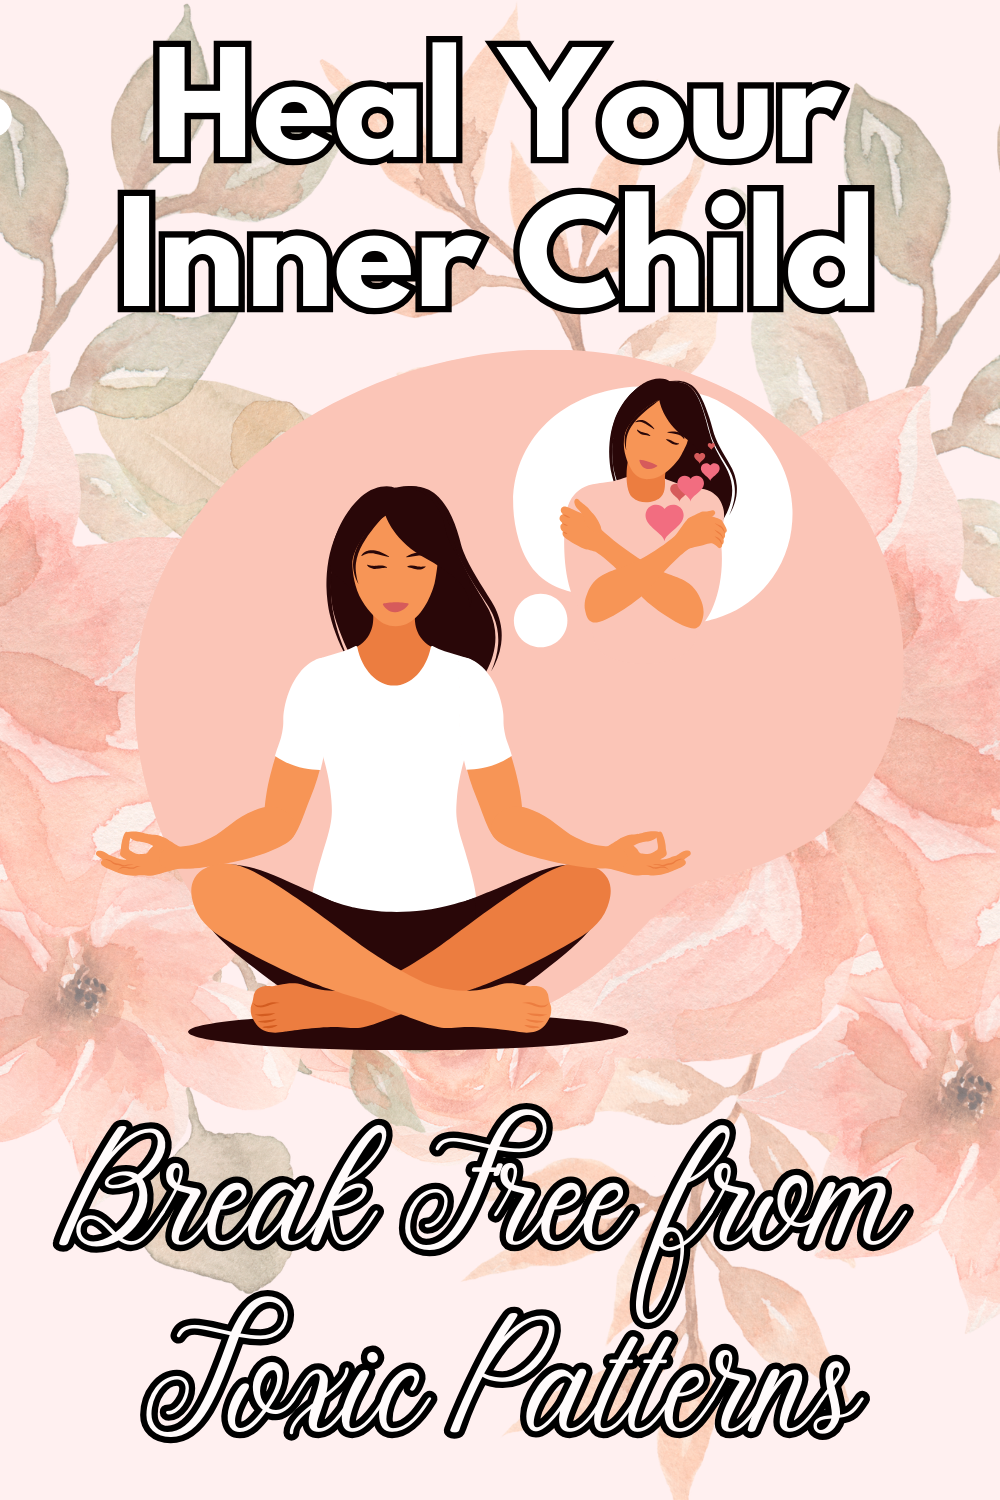 How to Heal Your Inner Child and Break Free from Toxic Patterns